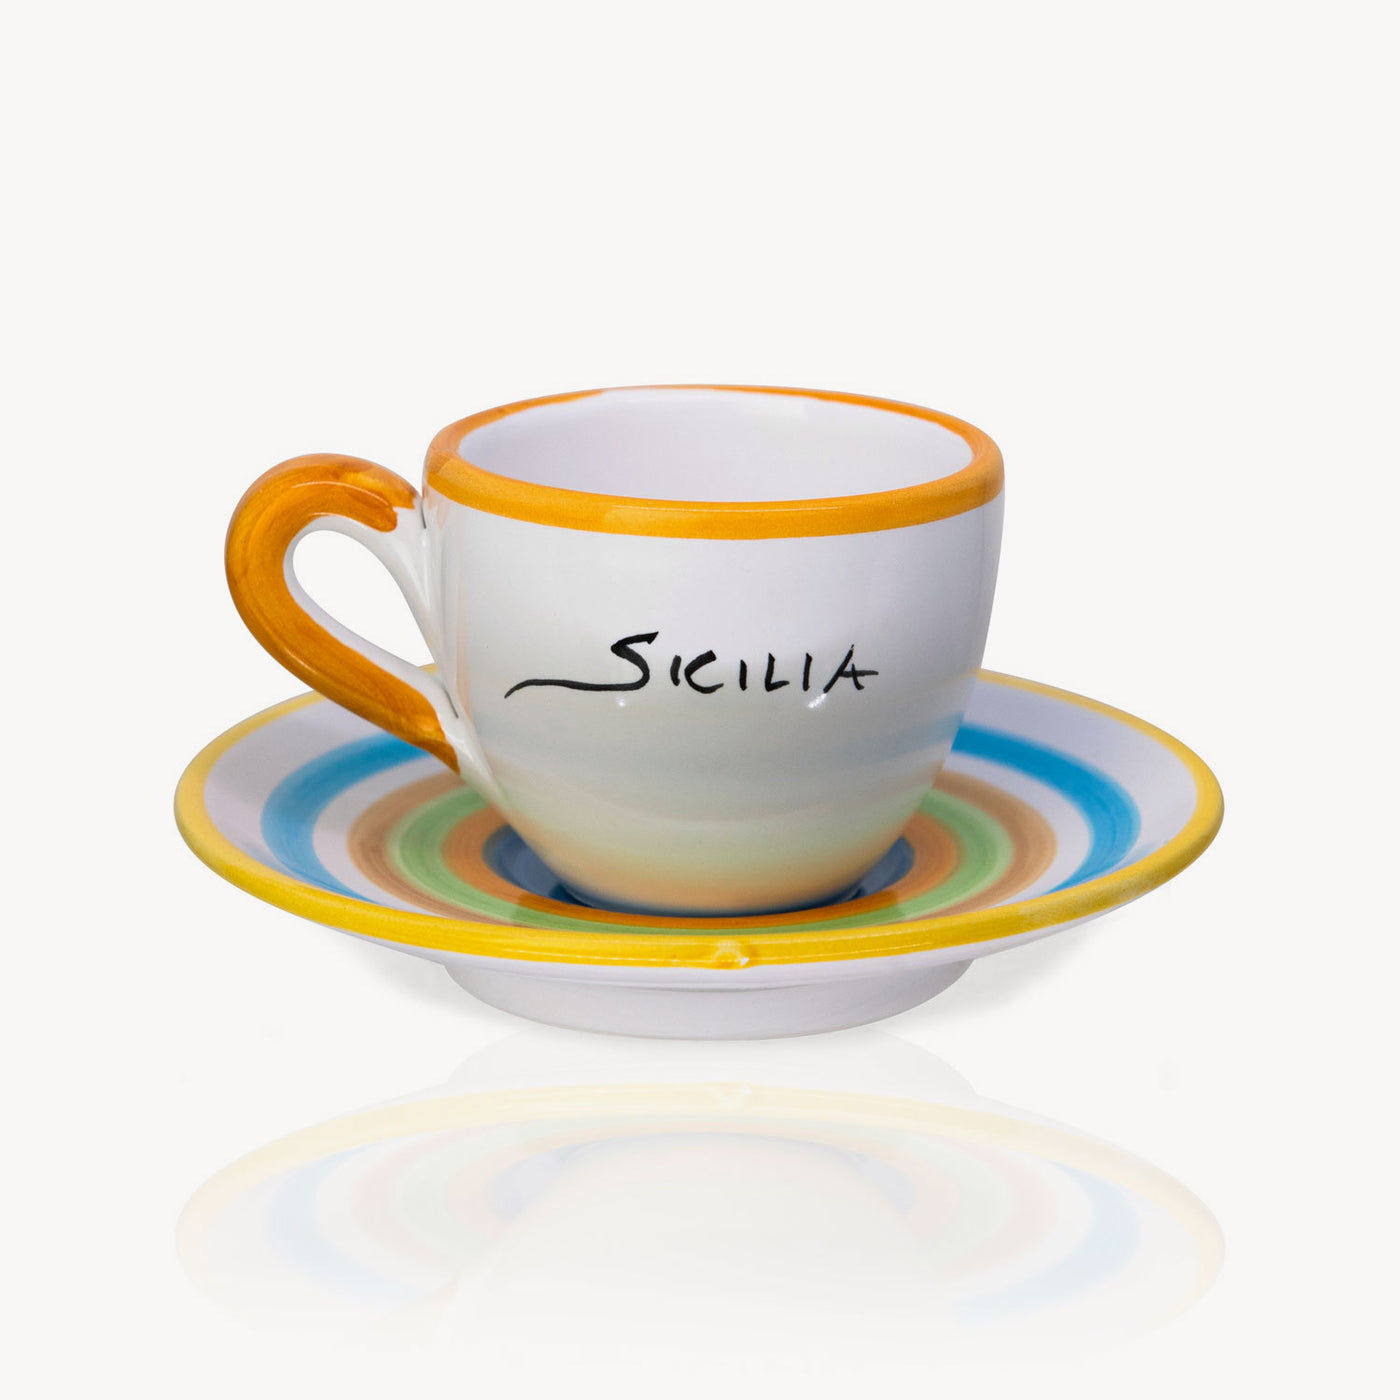 "Sicilia" - Hand-painted Coffee Cup